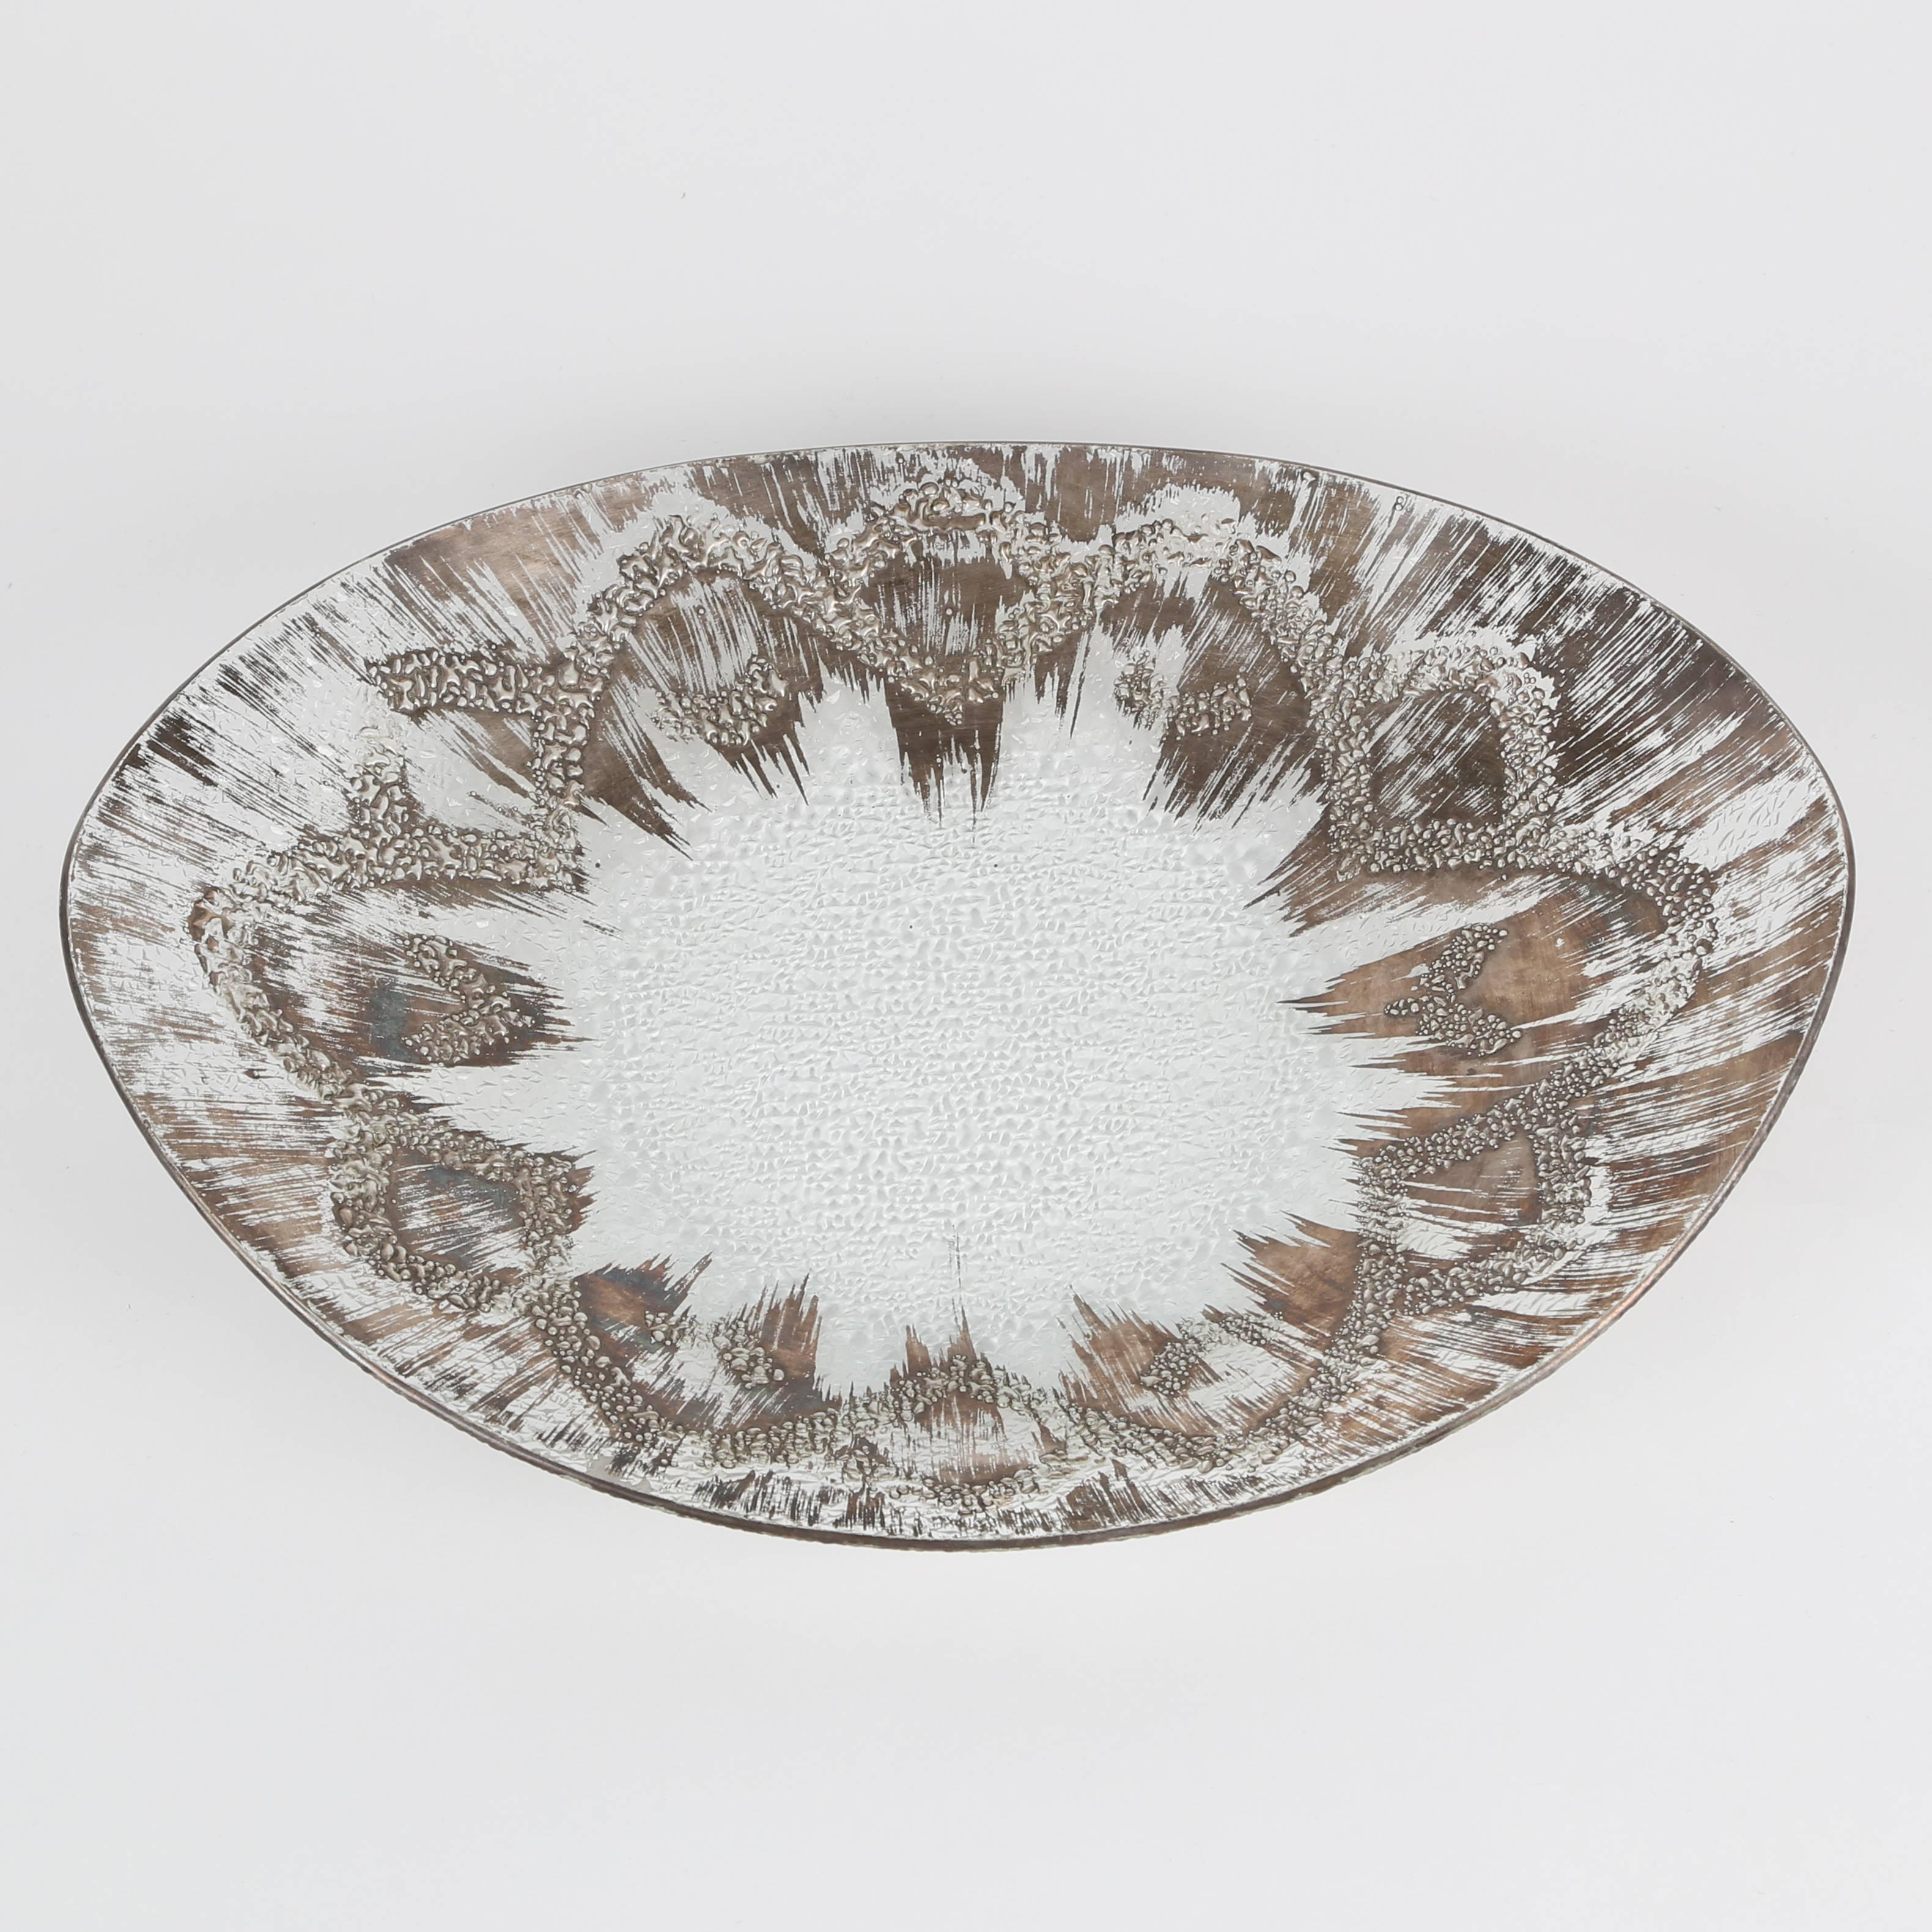 Elegant 1960s Dorothy Thorpe textured crystal bowl painted with sterling silver decoration. Organic ovoid shape. Note the textured underside, which shows through in the unadorned areas of the dish. Stunning reflective quality either as a centerpiece